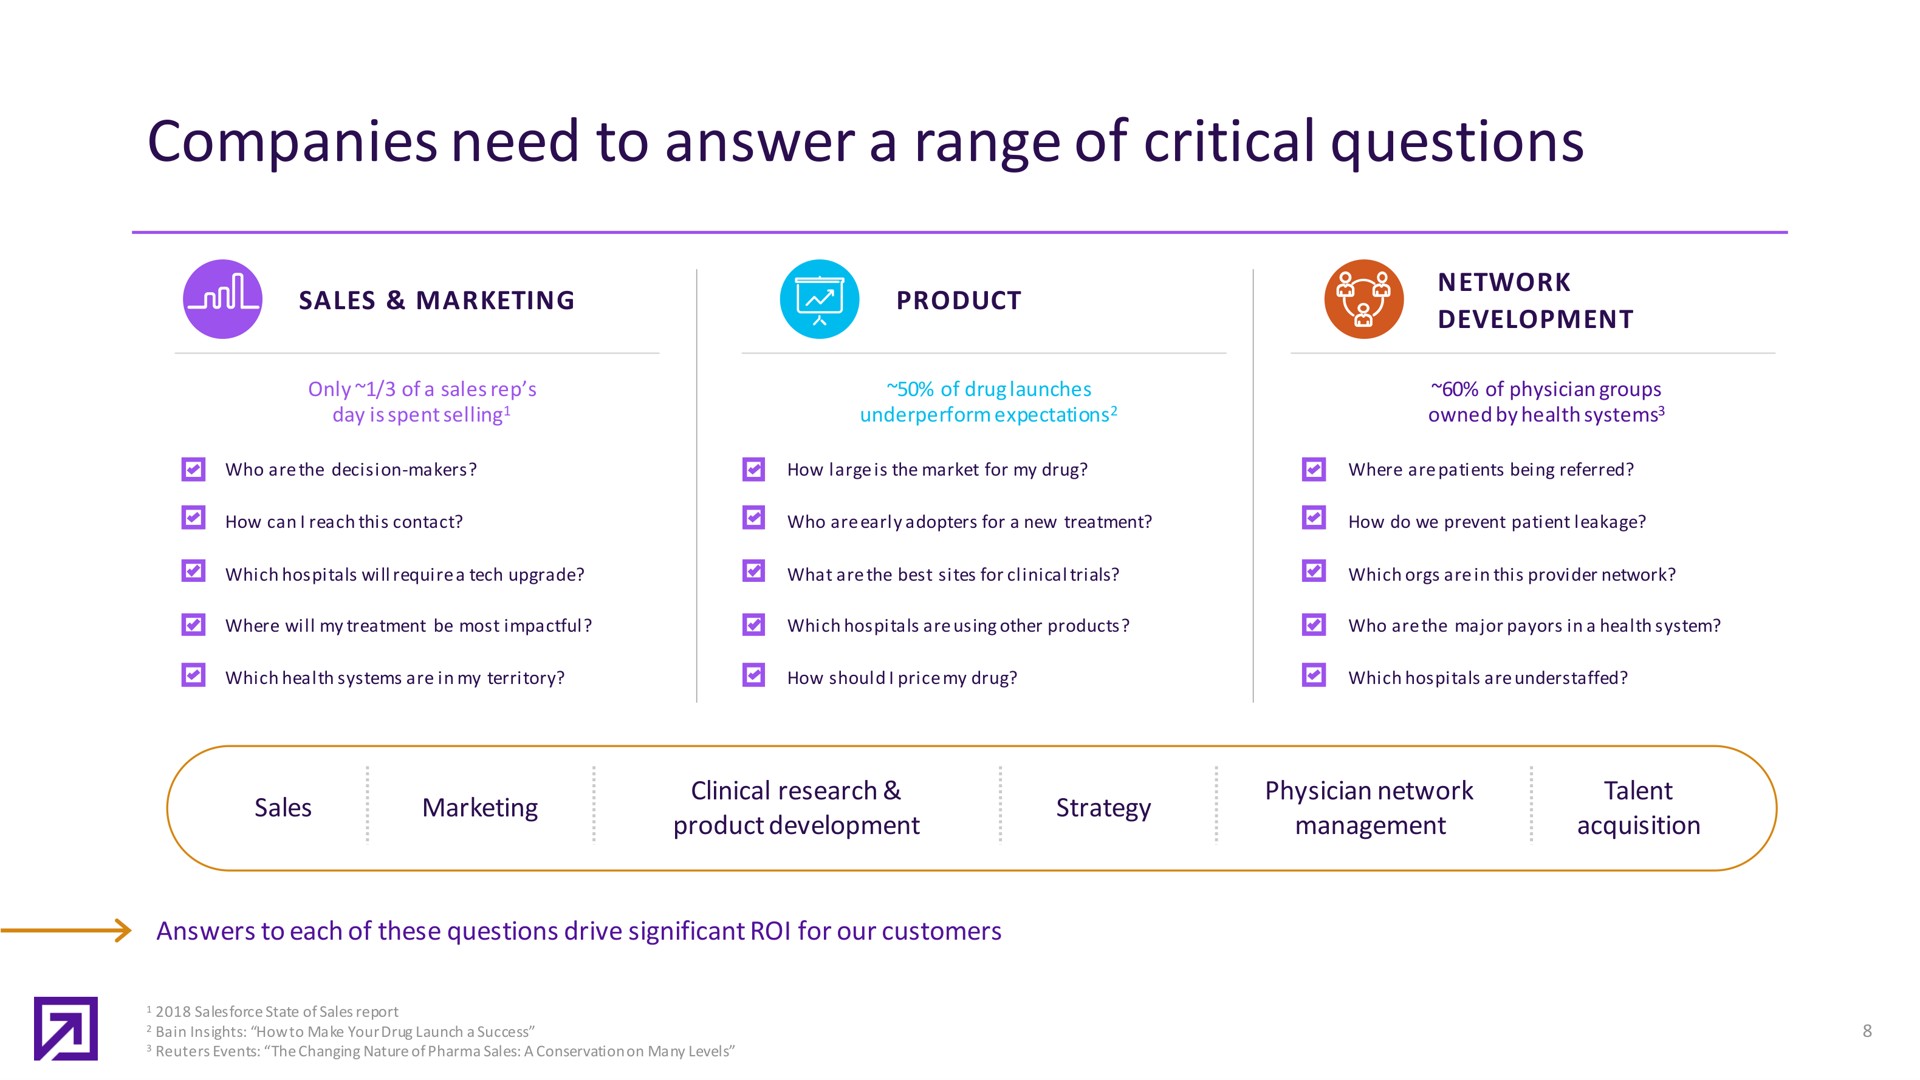 companies need to answer a range of critical questions | Definitive Healthcare